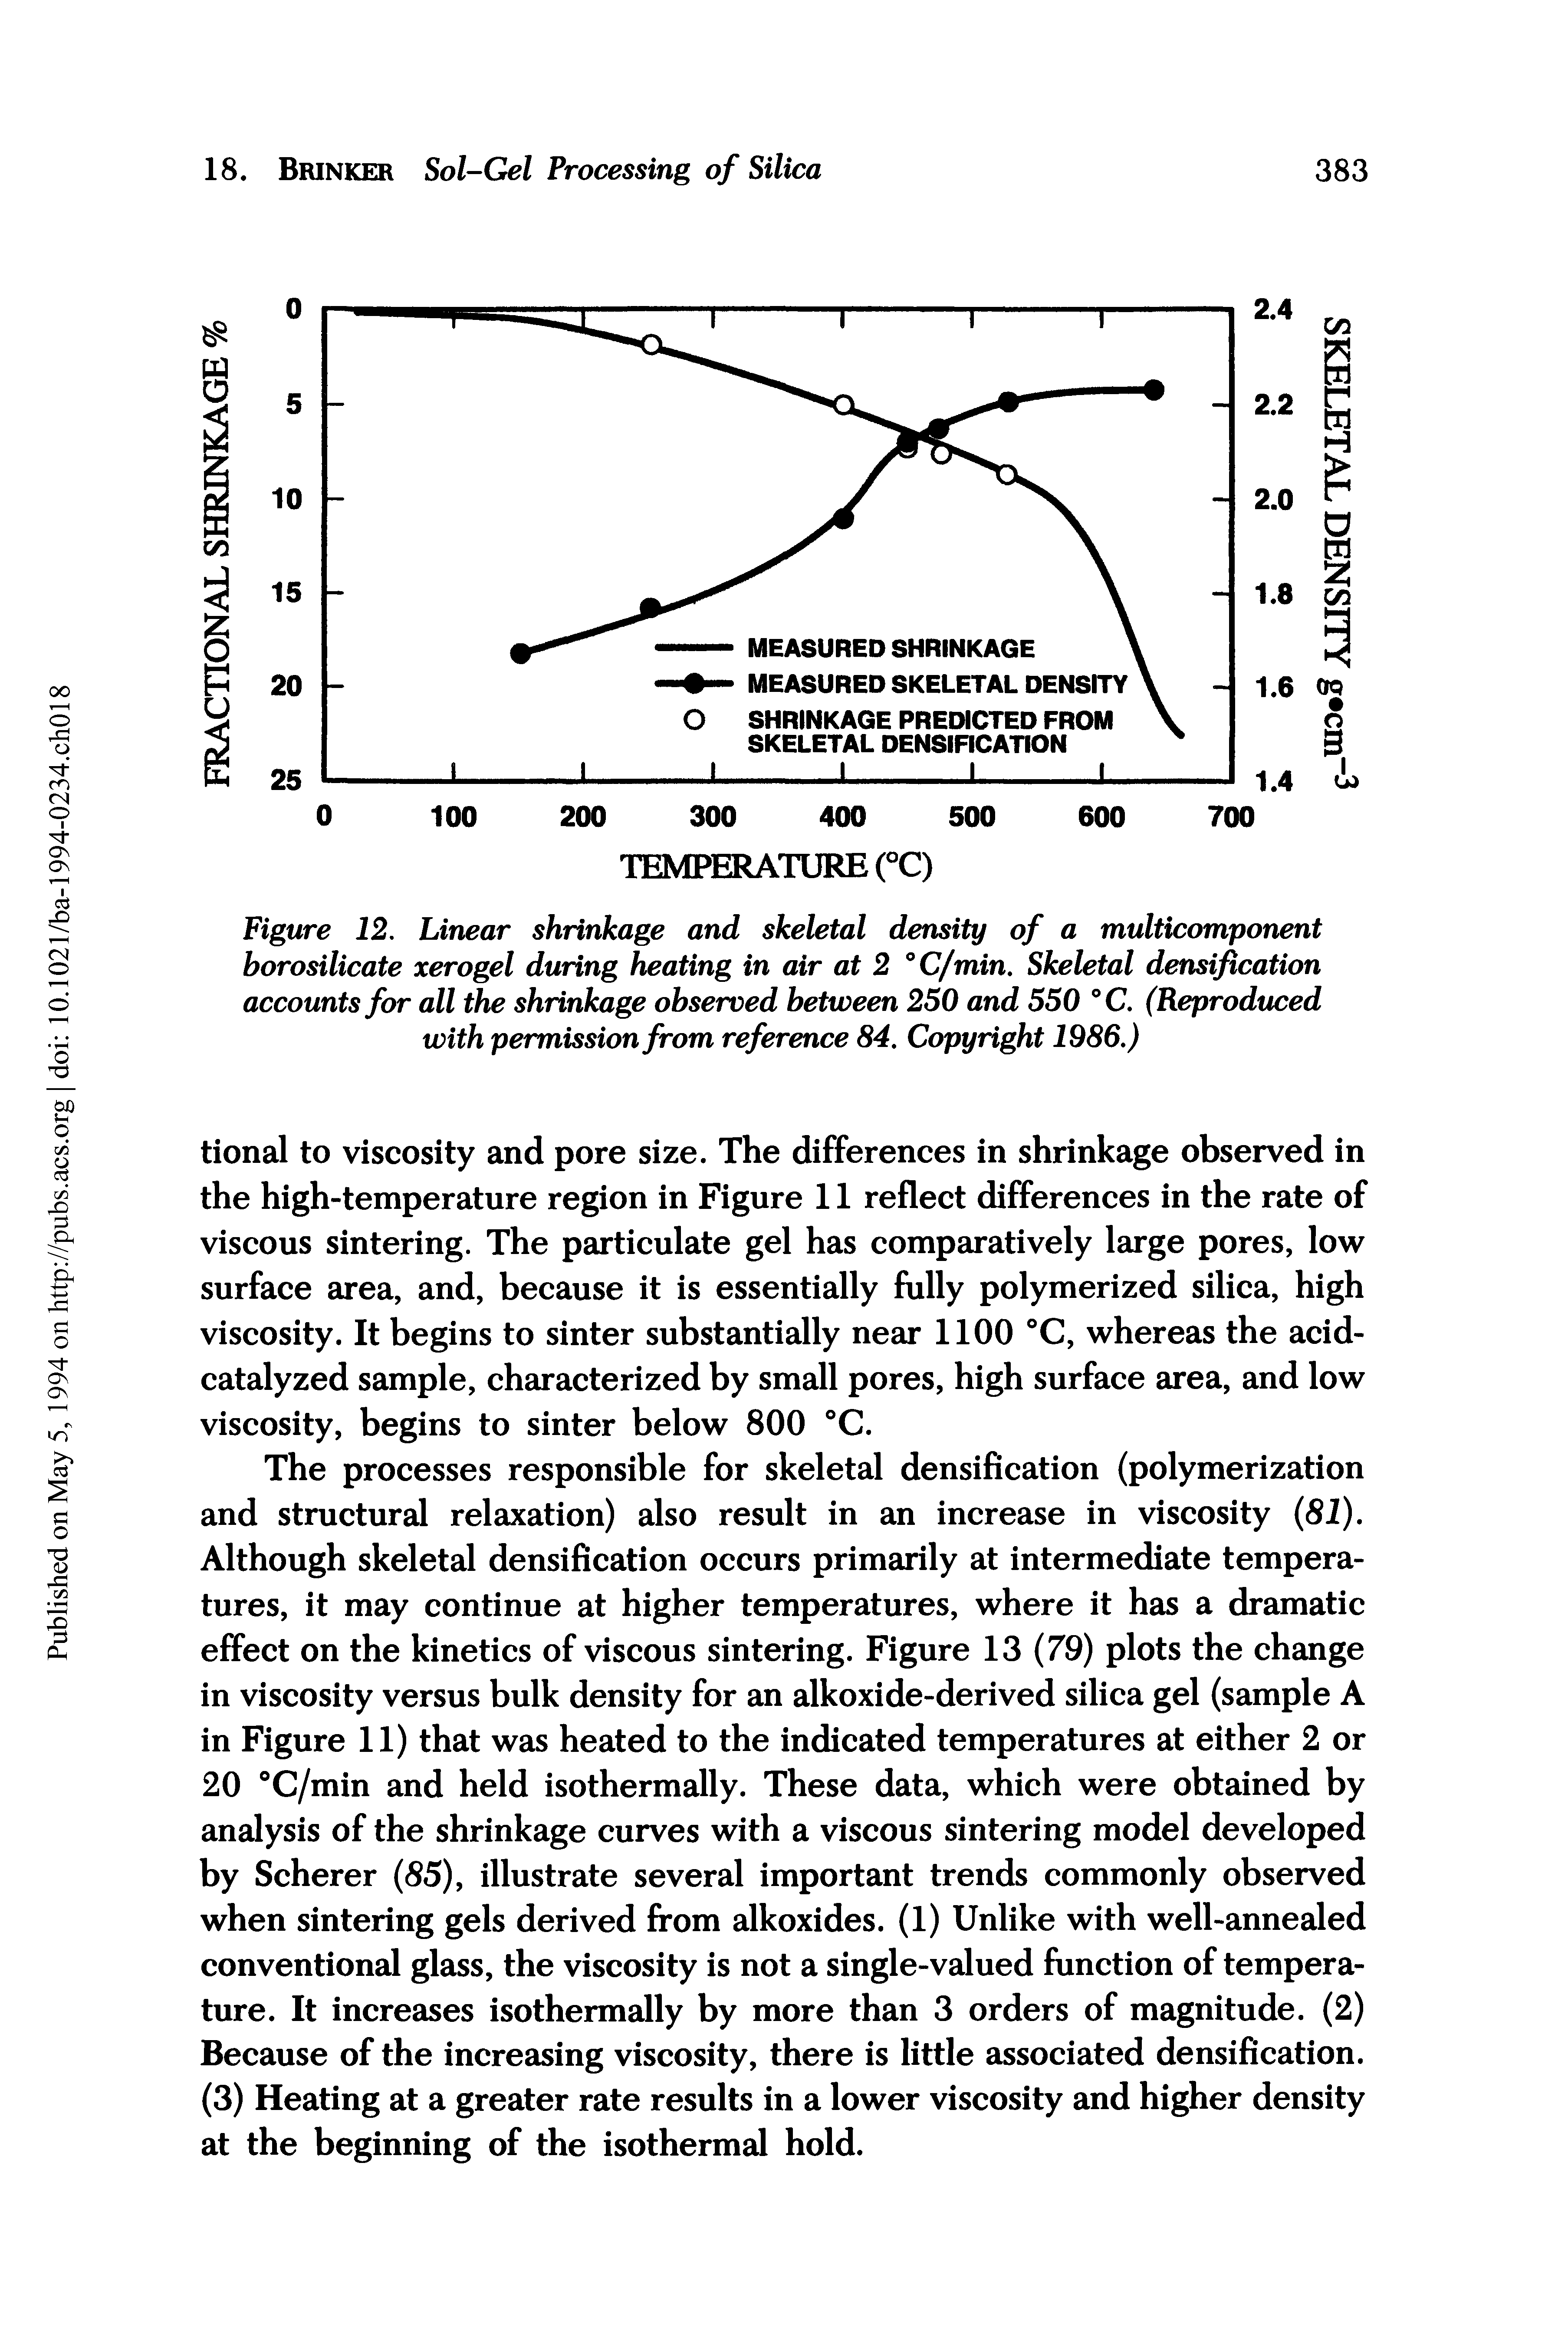 Figure 12. Linear shrinkage and skeletal density of a multicomponent borosilicate xerogel during heating in air at 2 °C/min. Skeletal densification accounts for all the shrinkage observed between 250 and 550 °C. (Reproduced with permission from reference 84. Copyright 1986.)...